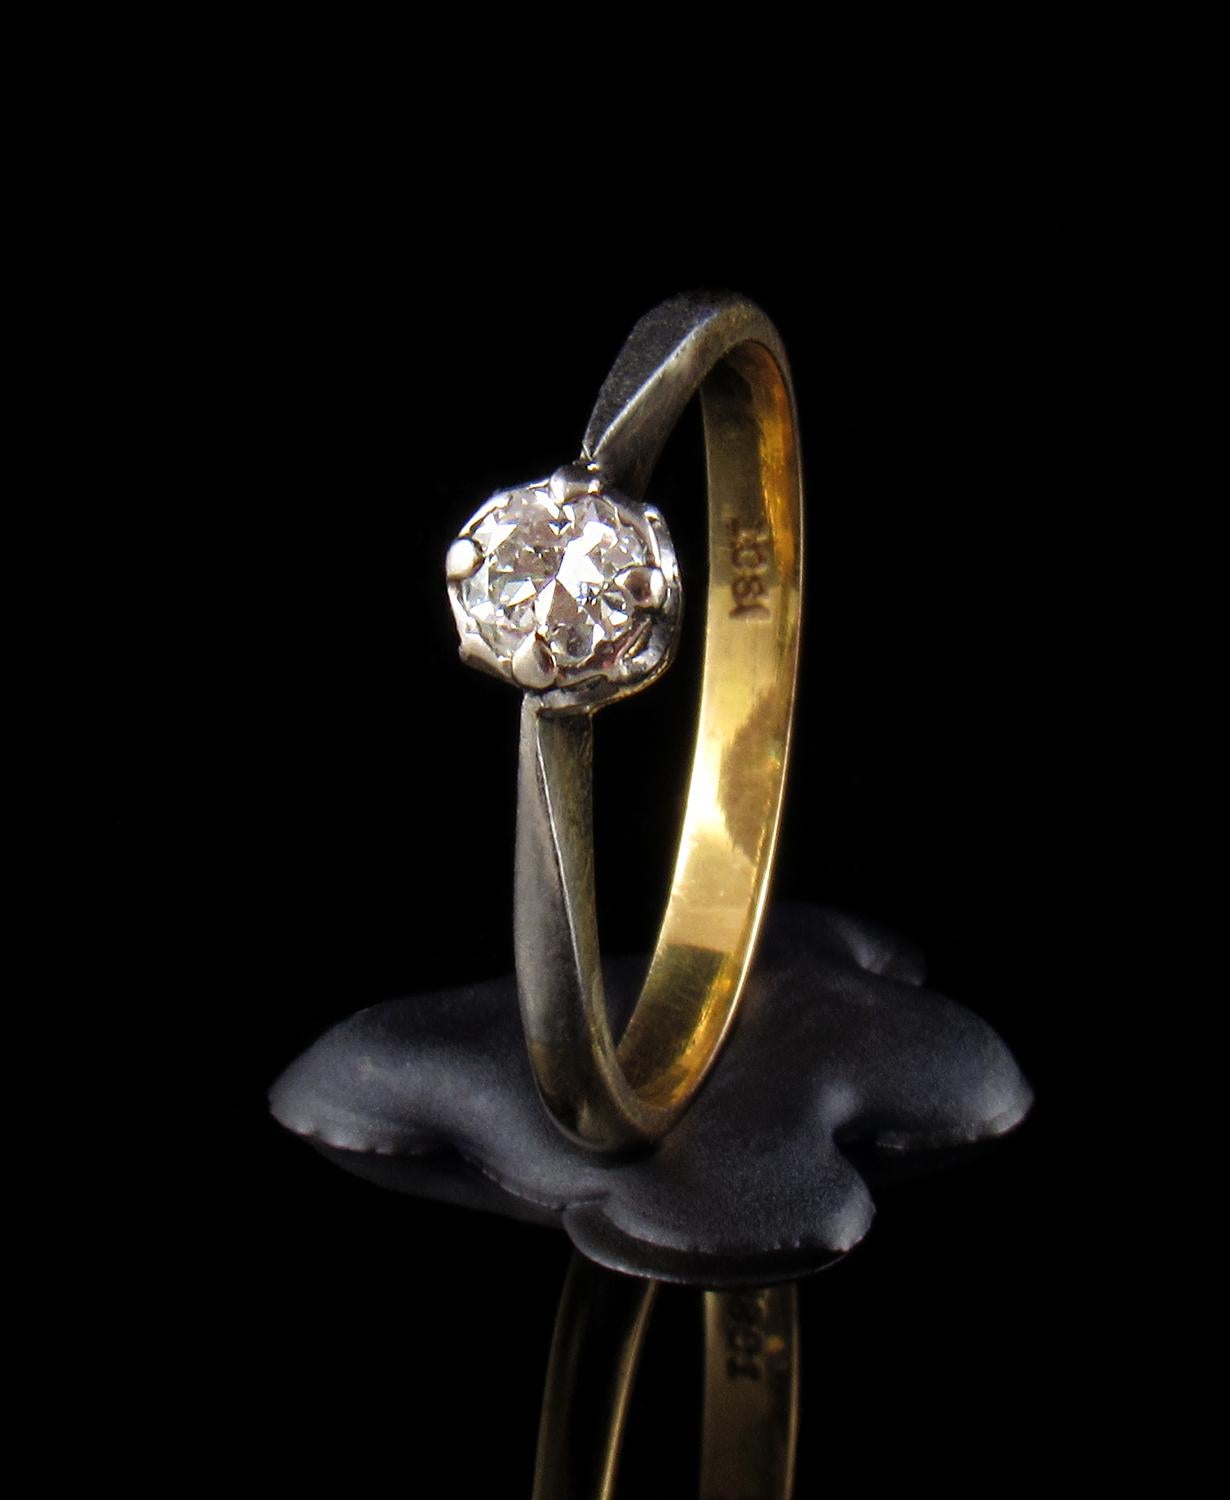 A lovely 1950s engagement ring with a very pretty setting and bright diamond of excellent clarity.

A very beautiful diamond ring with a single round old cut claw set diamond of 0.22-carat set in a solid 18-karat yellow gold smooth knife edge